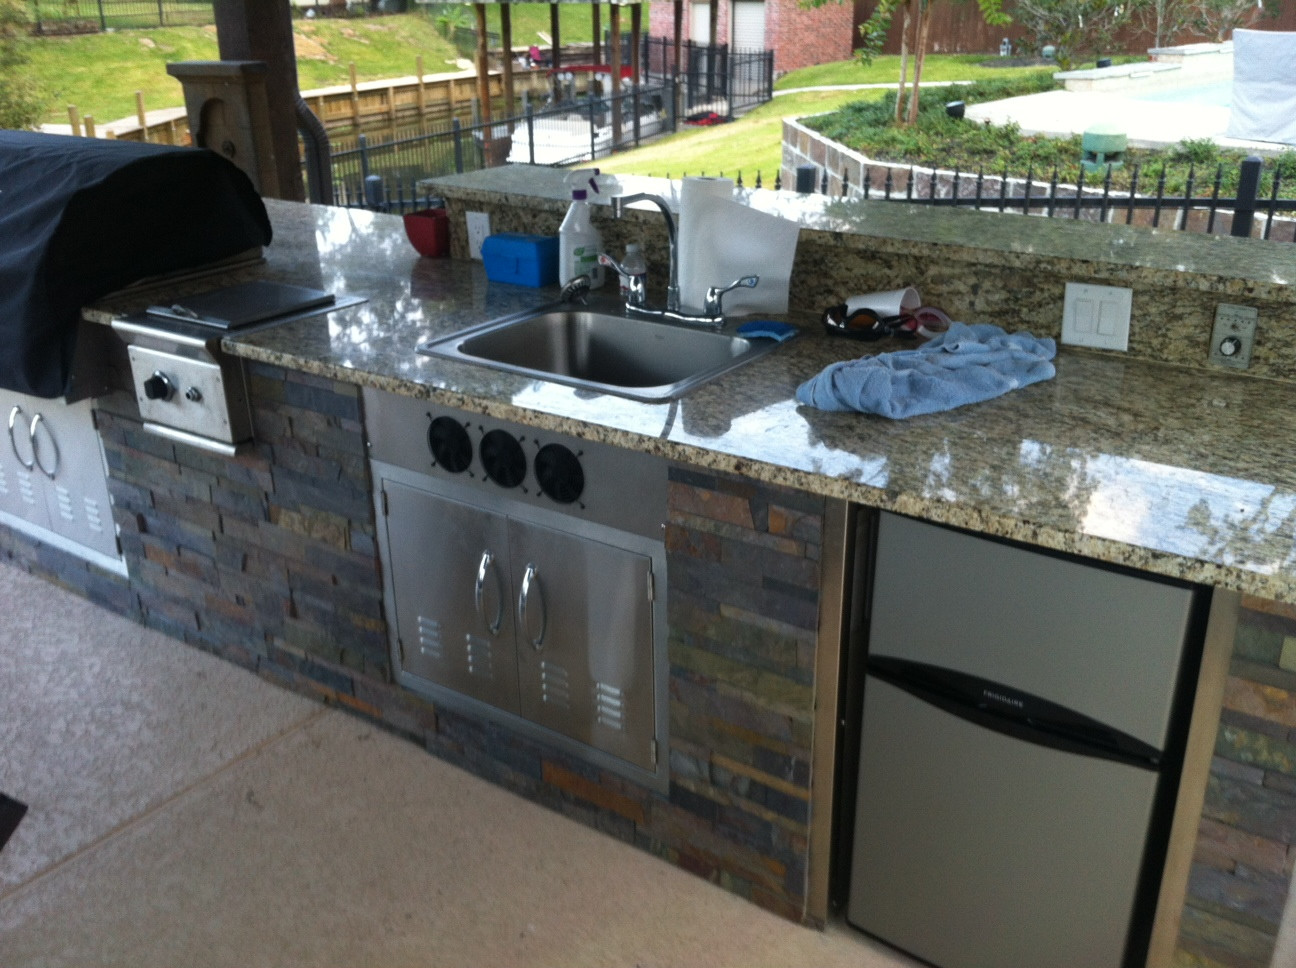 DIY Outdoor Kitchen Kits
 Just about done with my outdoor kitchen DIY granite